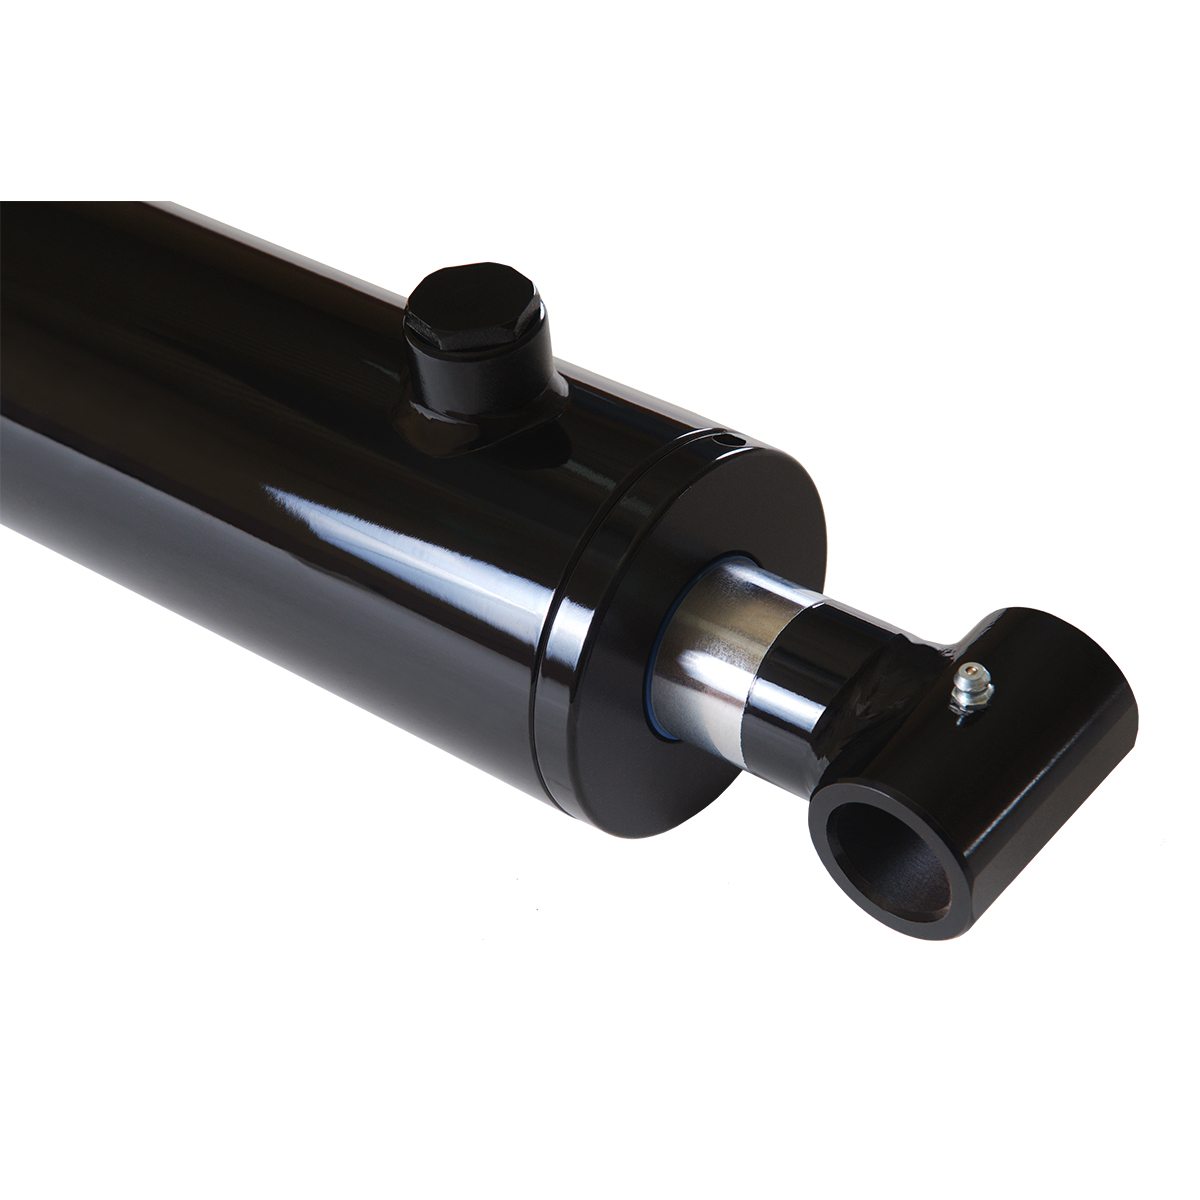 3 bore x 48 stroke hydraulic cylinder, welded cross tube double acting cylinder | Magister Hydraulics